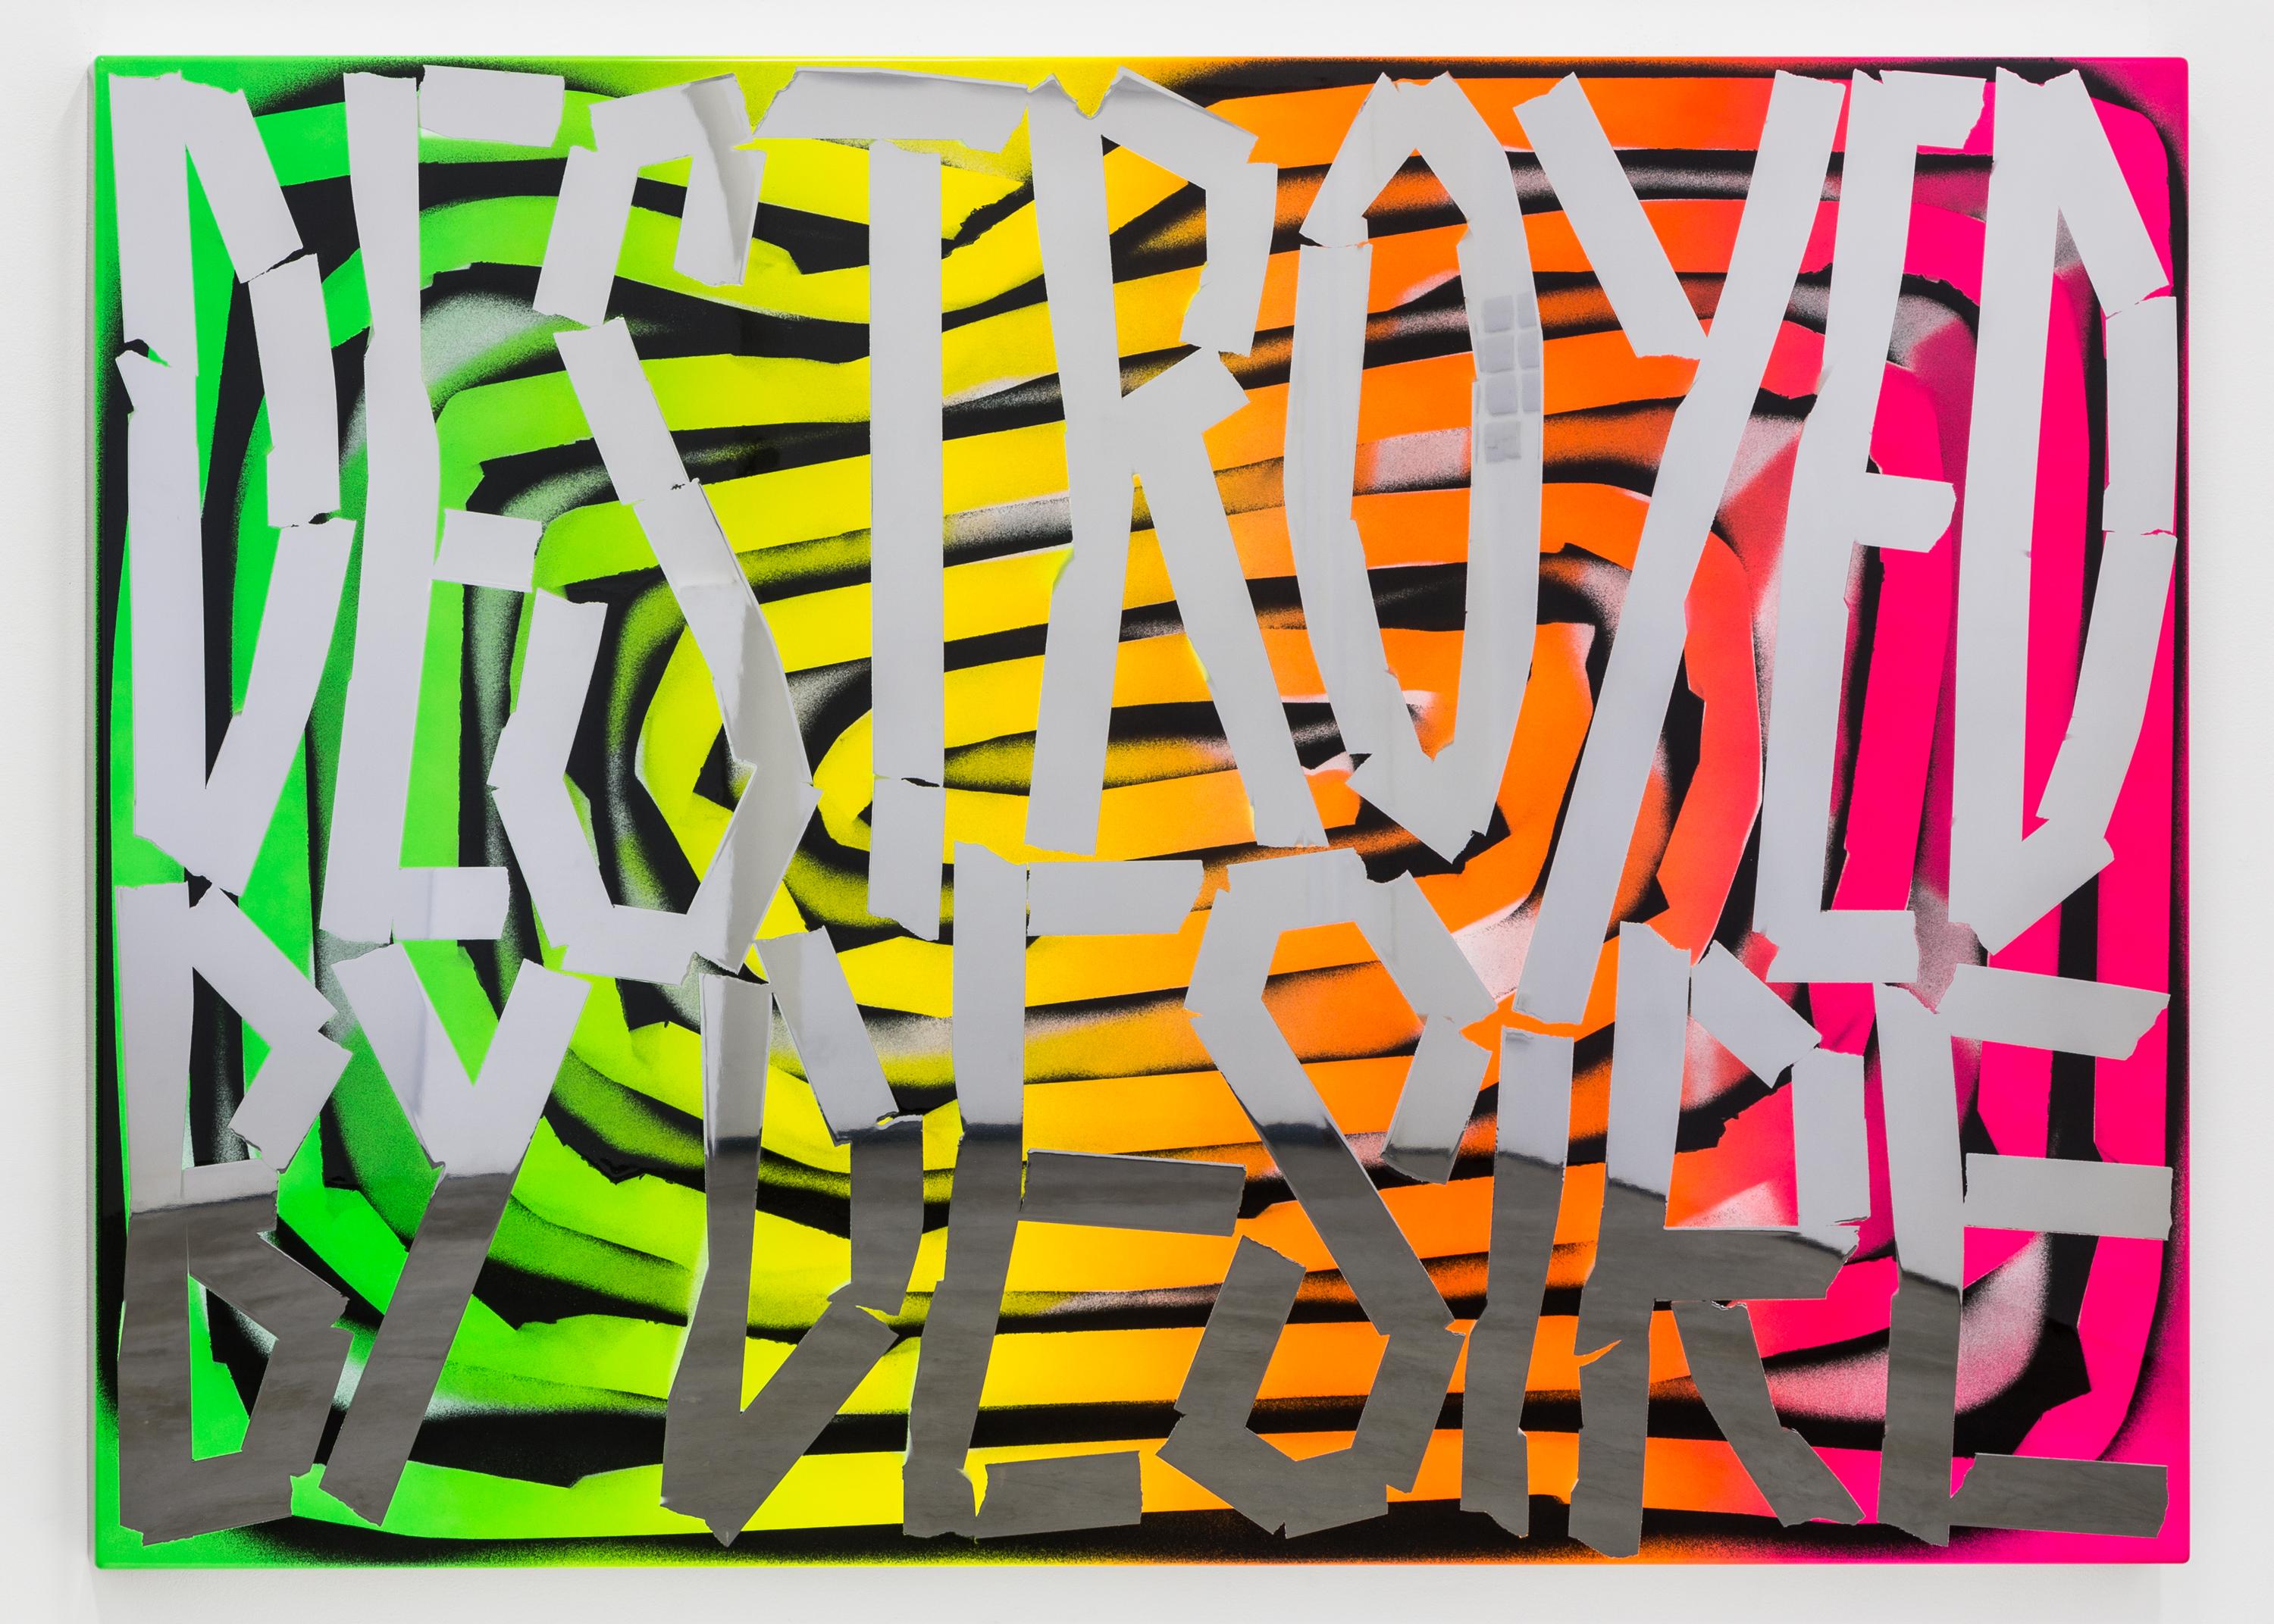 Large jagged letters that read "DESTROYED BY DESIRE" appear over a crude spiral of fluorescent green, yellow, orange, and pink.